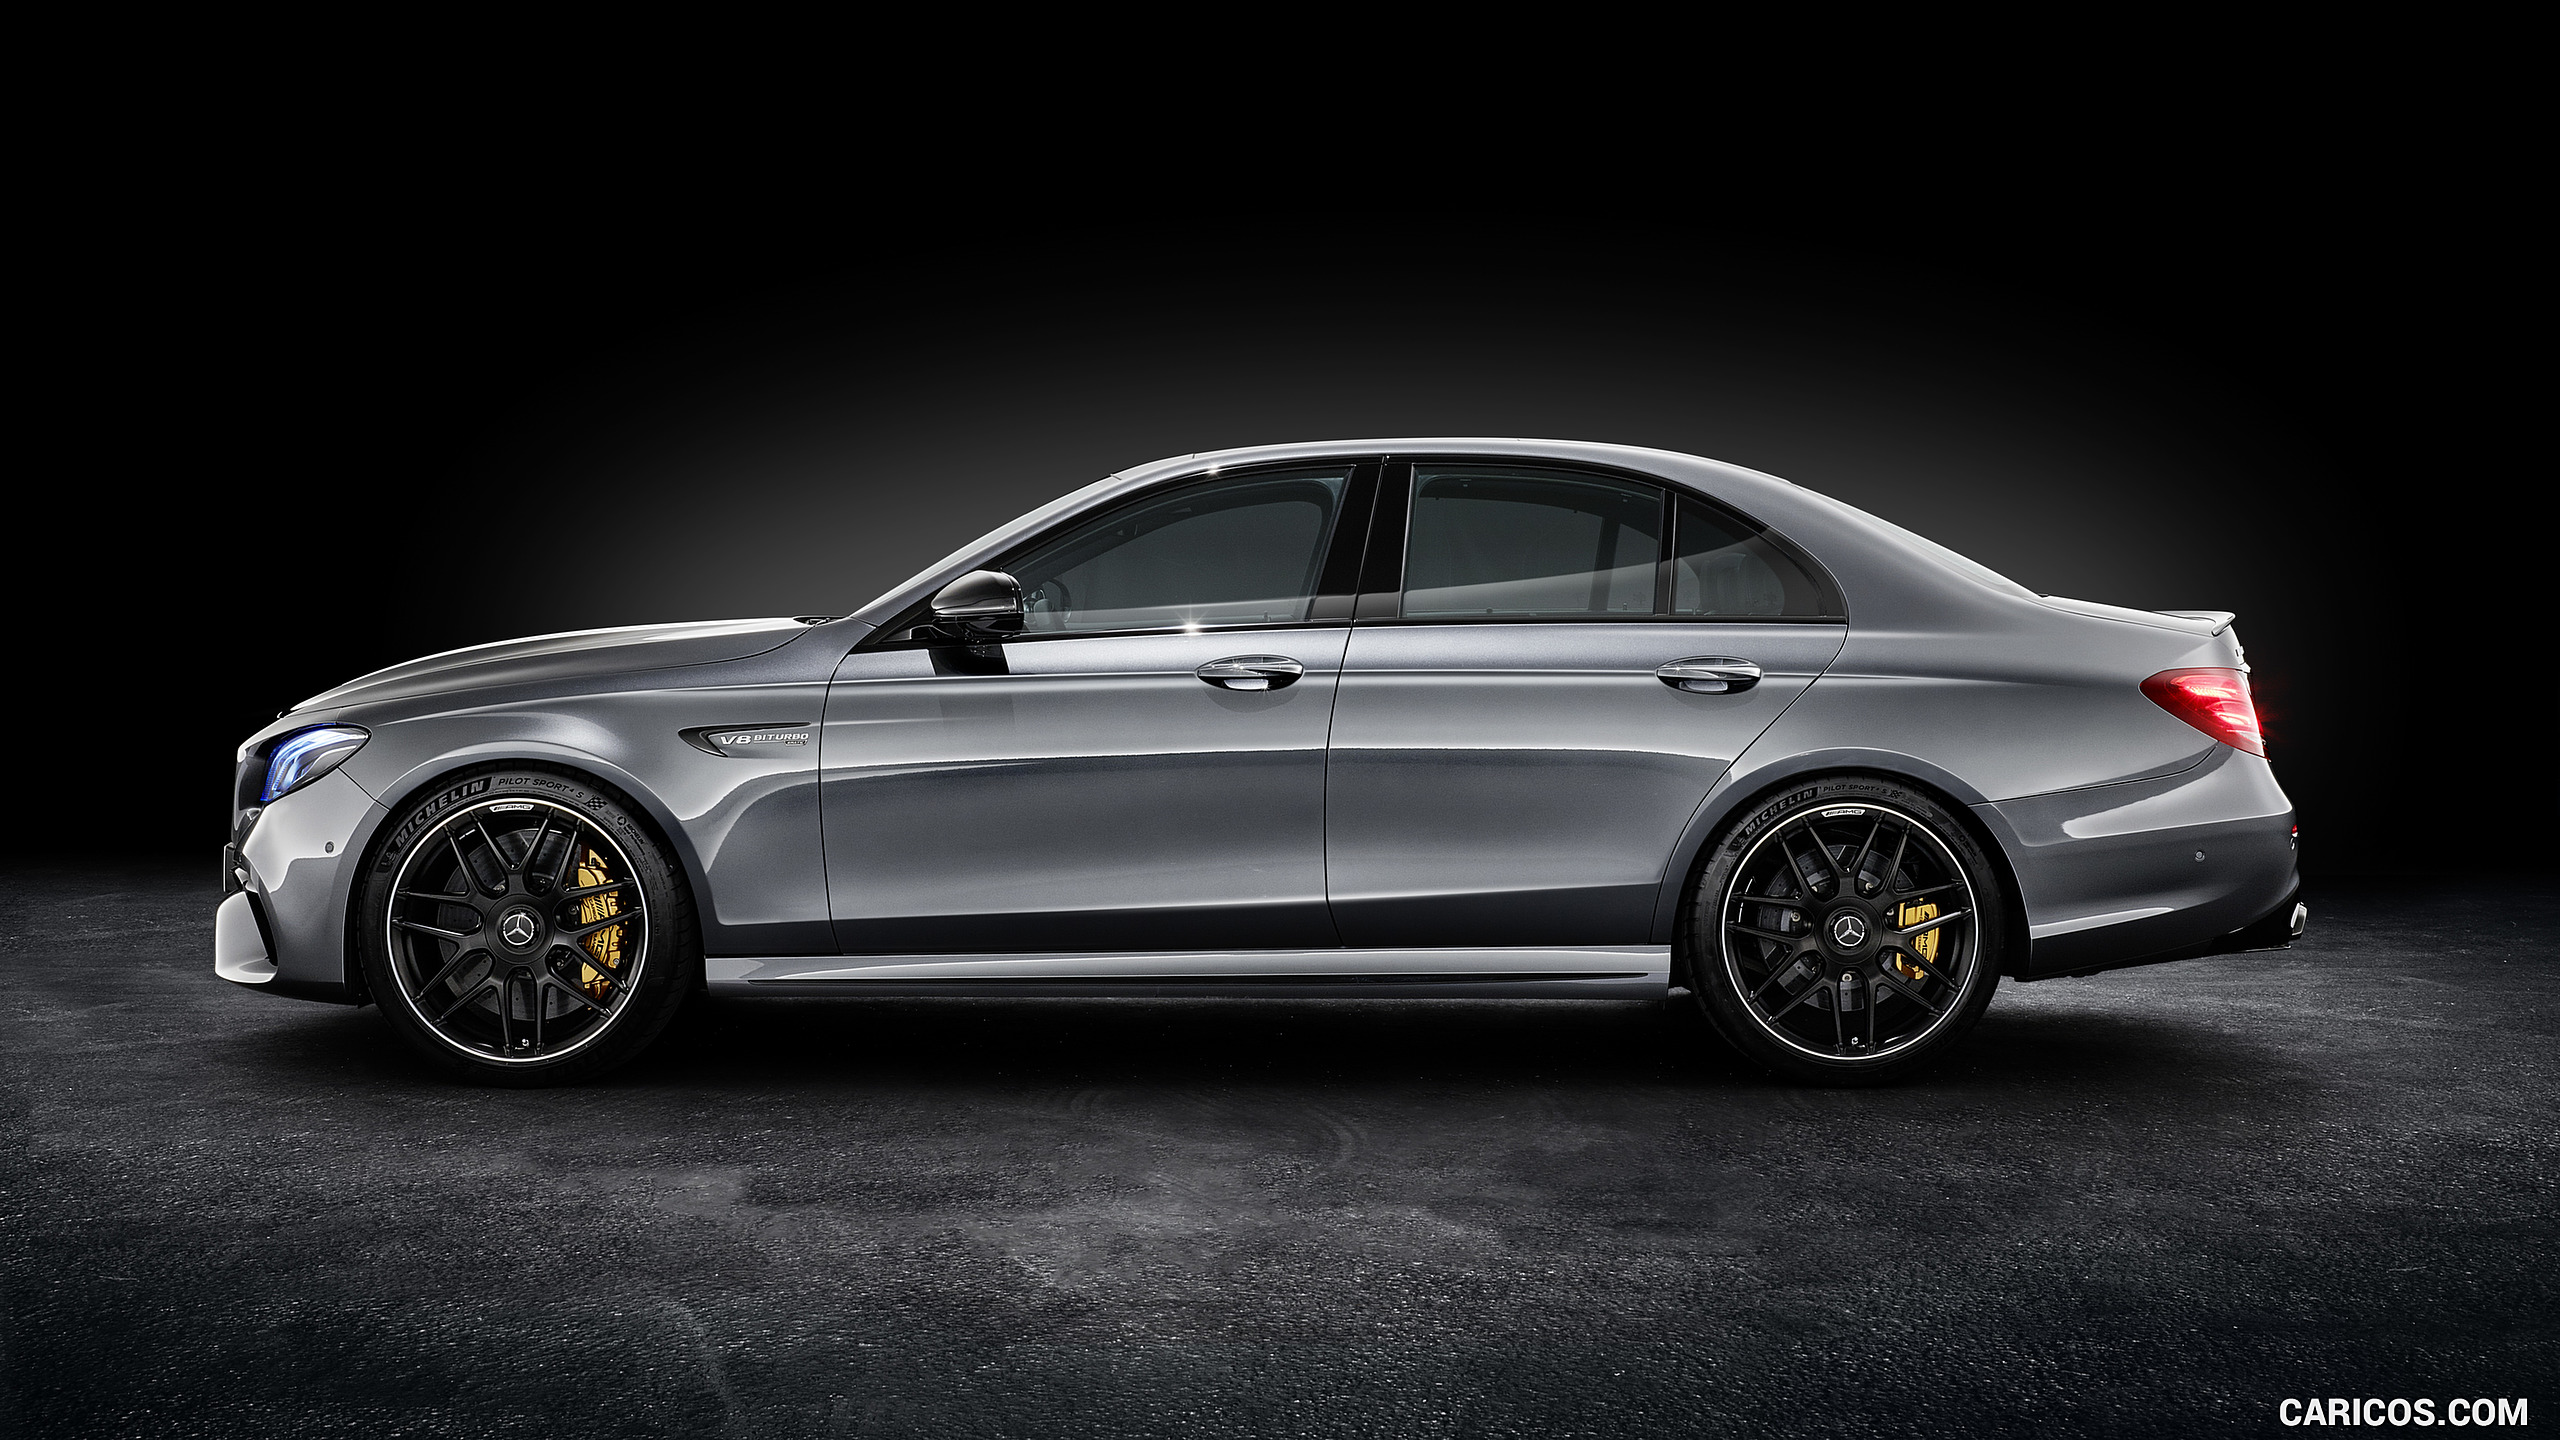 2018 Mercedes-AMG E63 S 4MATIC+ - Side, #42 of 323